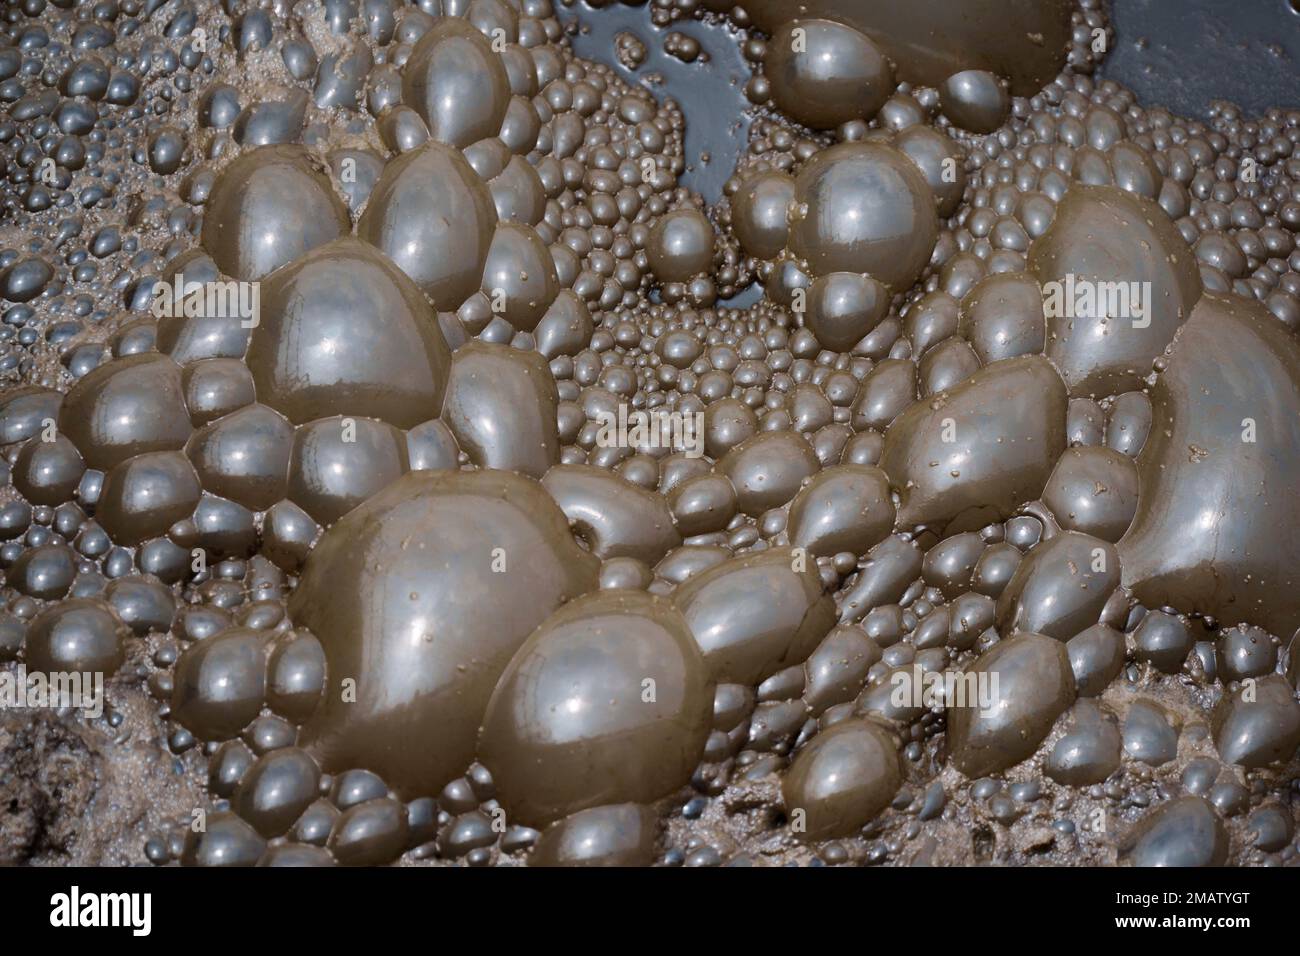 Bubbles form from the polluted water of the Bagmati River as it is processed at the Guheswori Wastewater Treatment Plant before it reaches the Pashupatinath Temple in Kathmandu, Nepal, Friday, June 3, 2022. (AP Photo/Niranjan Shrestha) Stockfoto